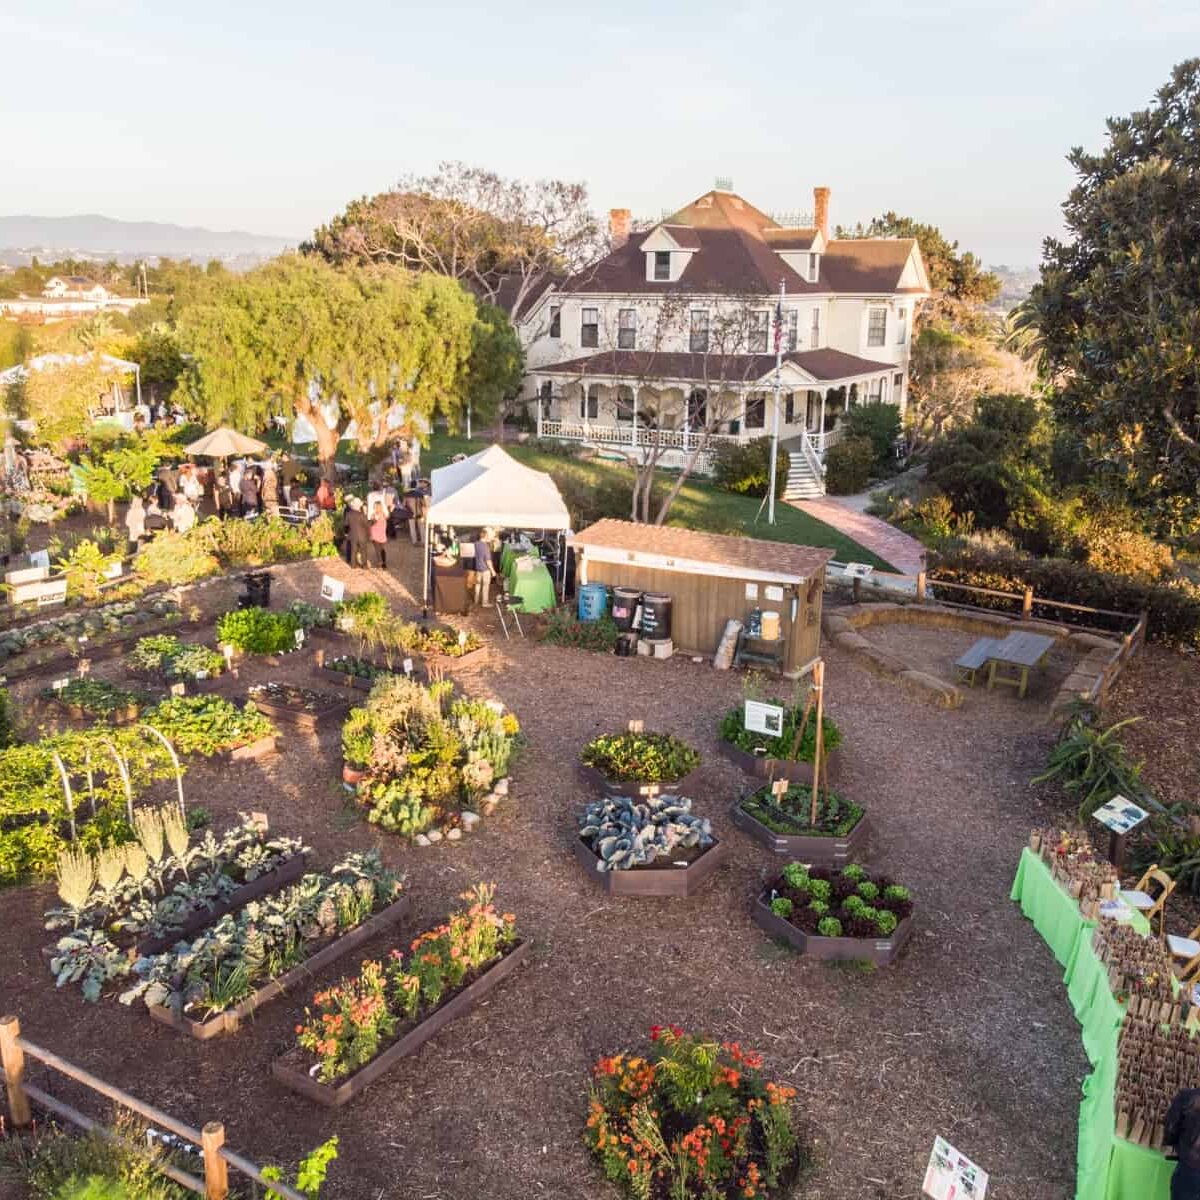 An aerial view of the Olivewood Gardens, including a large, white Victorian home and a sprawling garden space with raised flower beds and trees.